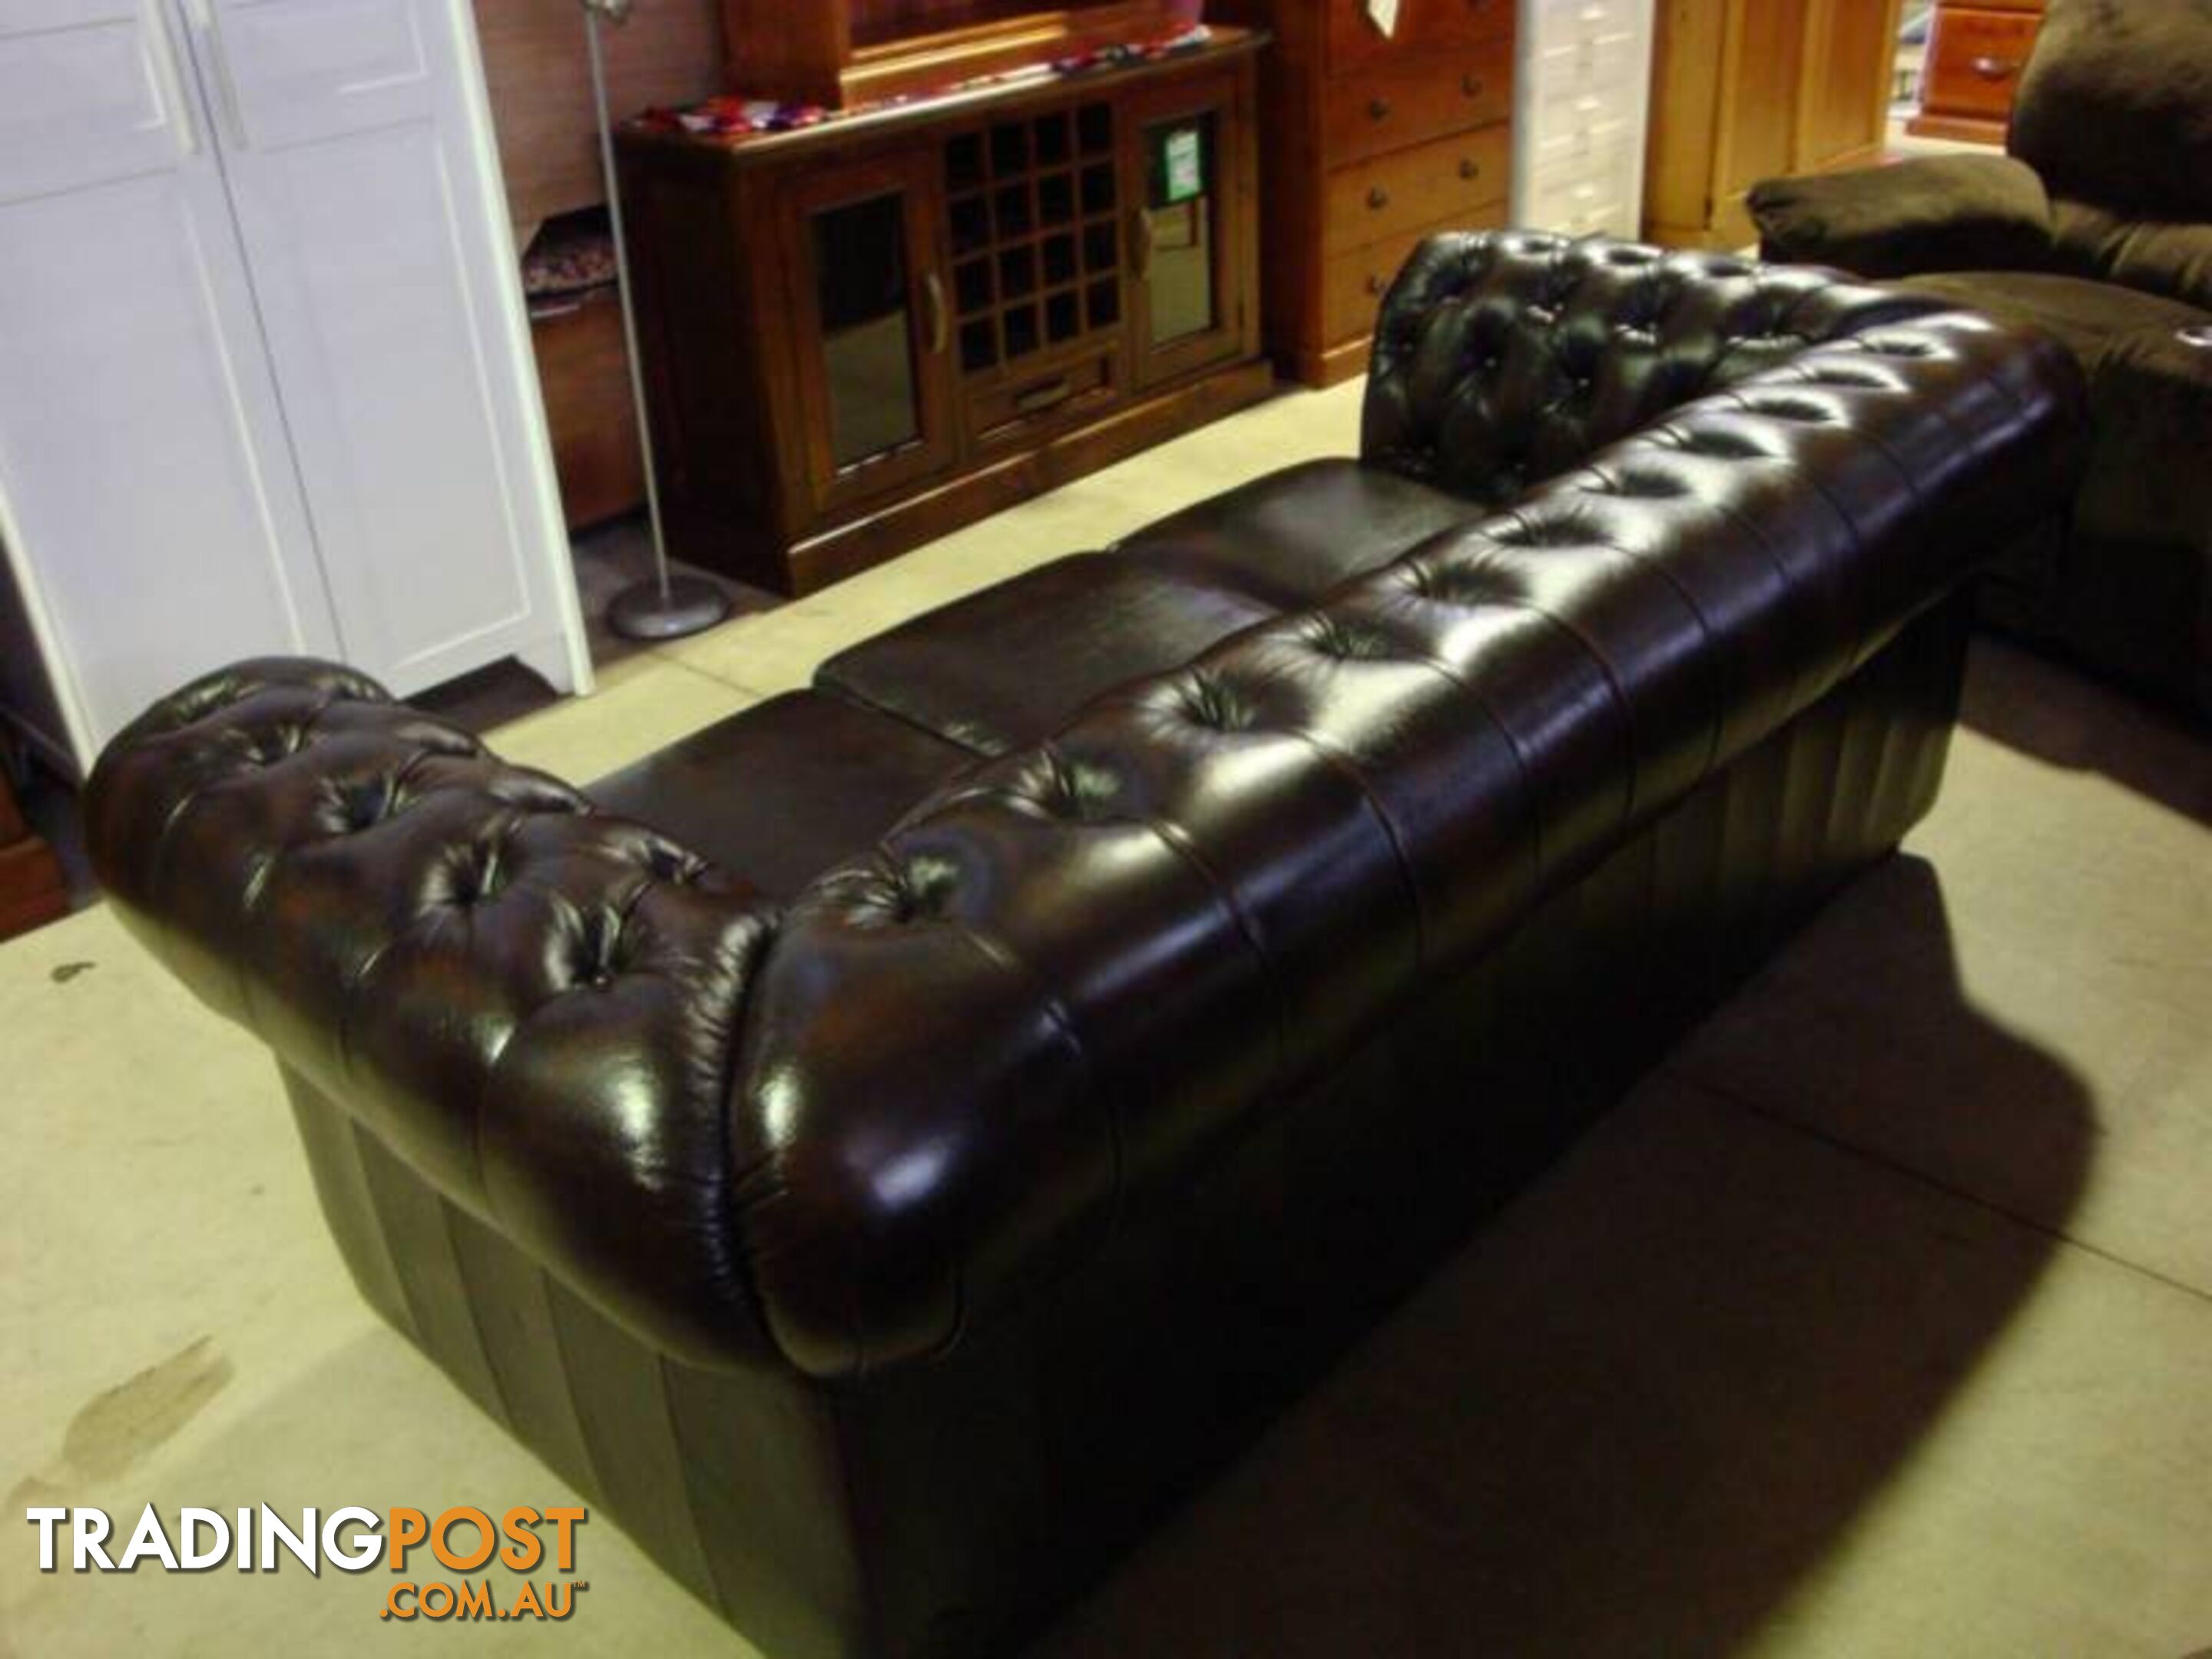 LOUNGE NEW CHESTERFIELD 100% COW LEATHER. RENT KEEP $25.30 PW